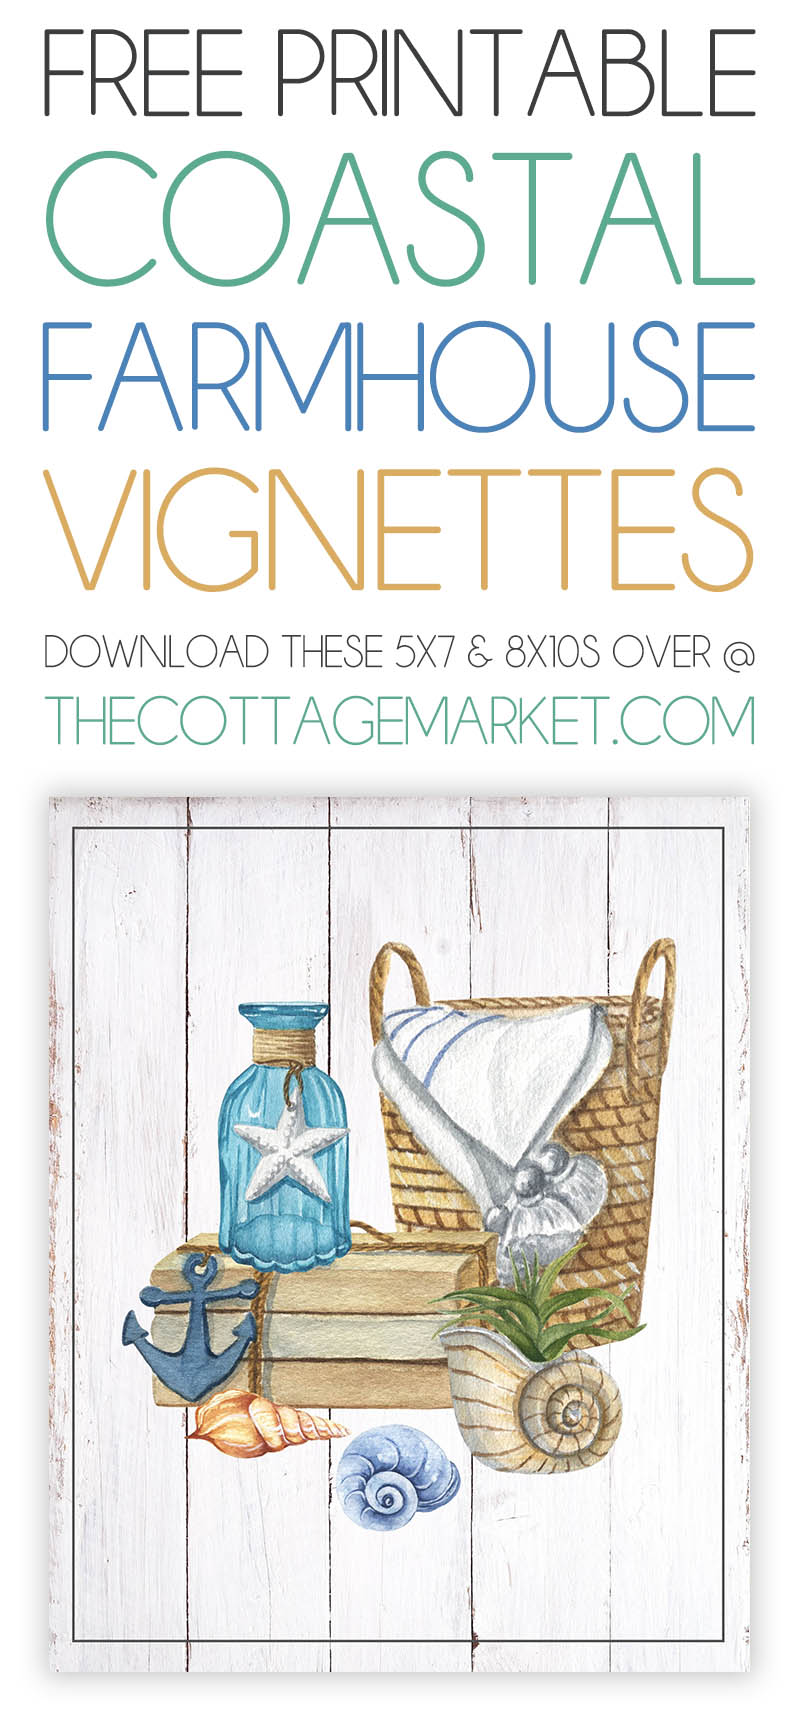 These Free Printable Coastal Farmhouse Vignettes are going to look amazing in your home.  A perfect little touch for the walls, gallery wall, vignettes and more.